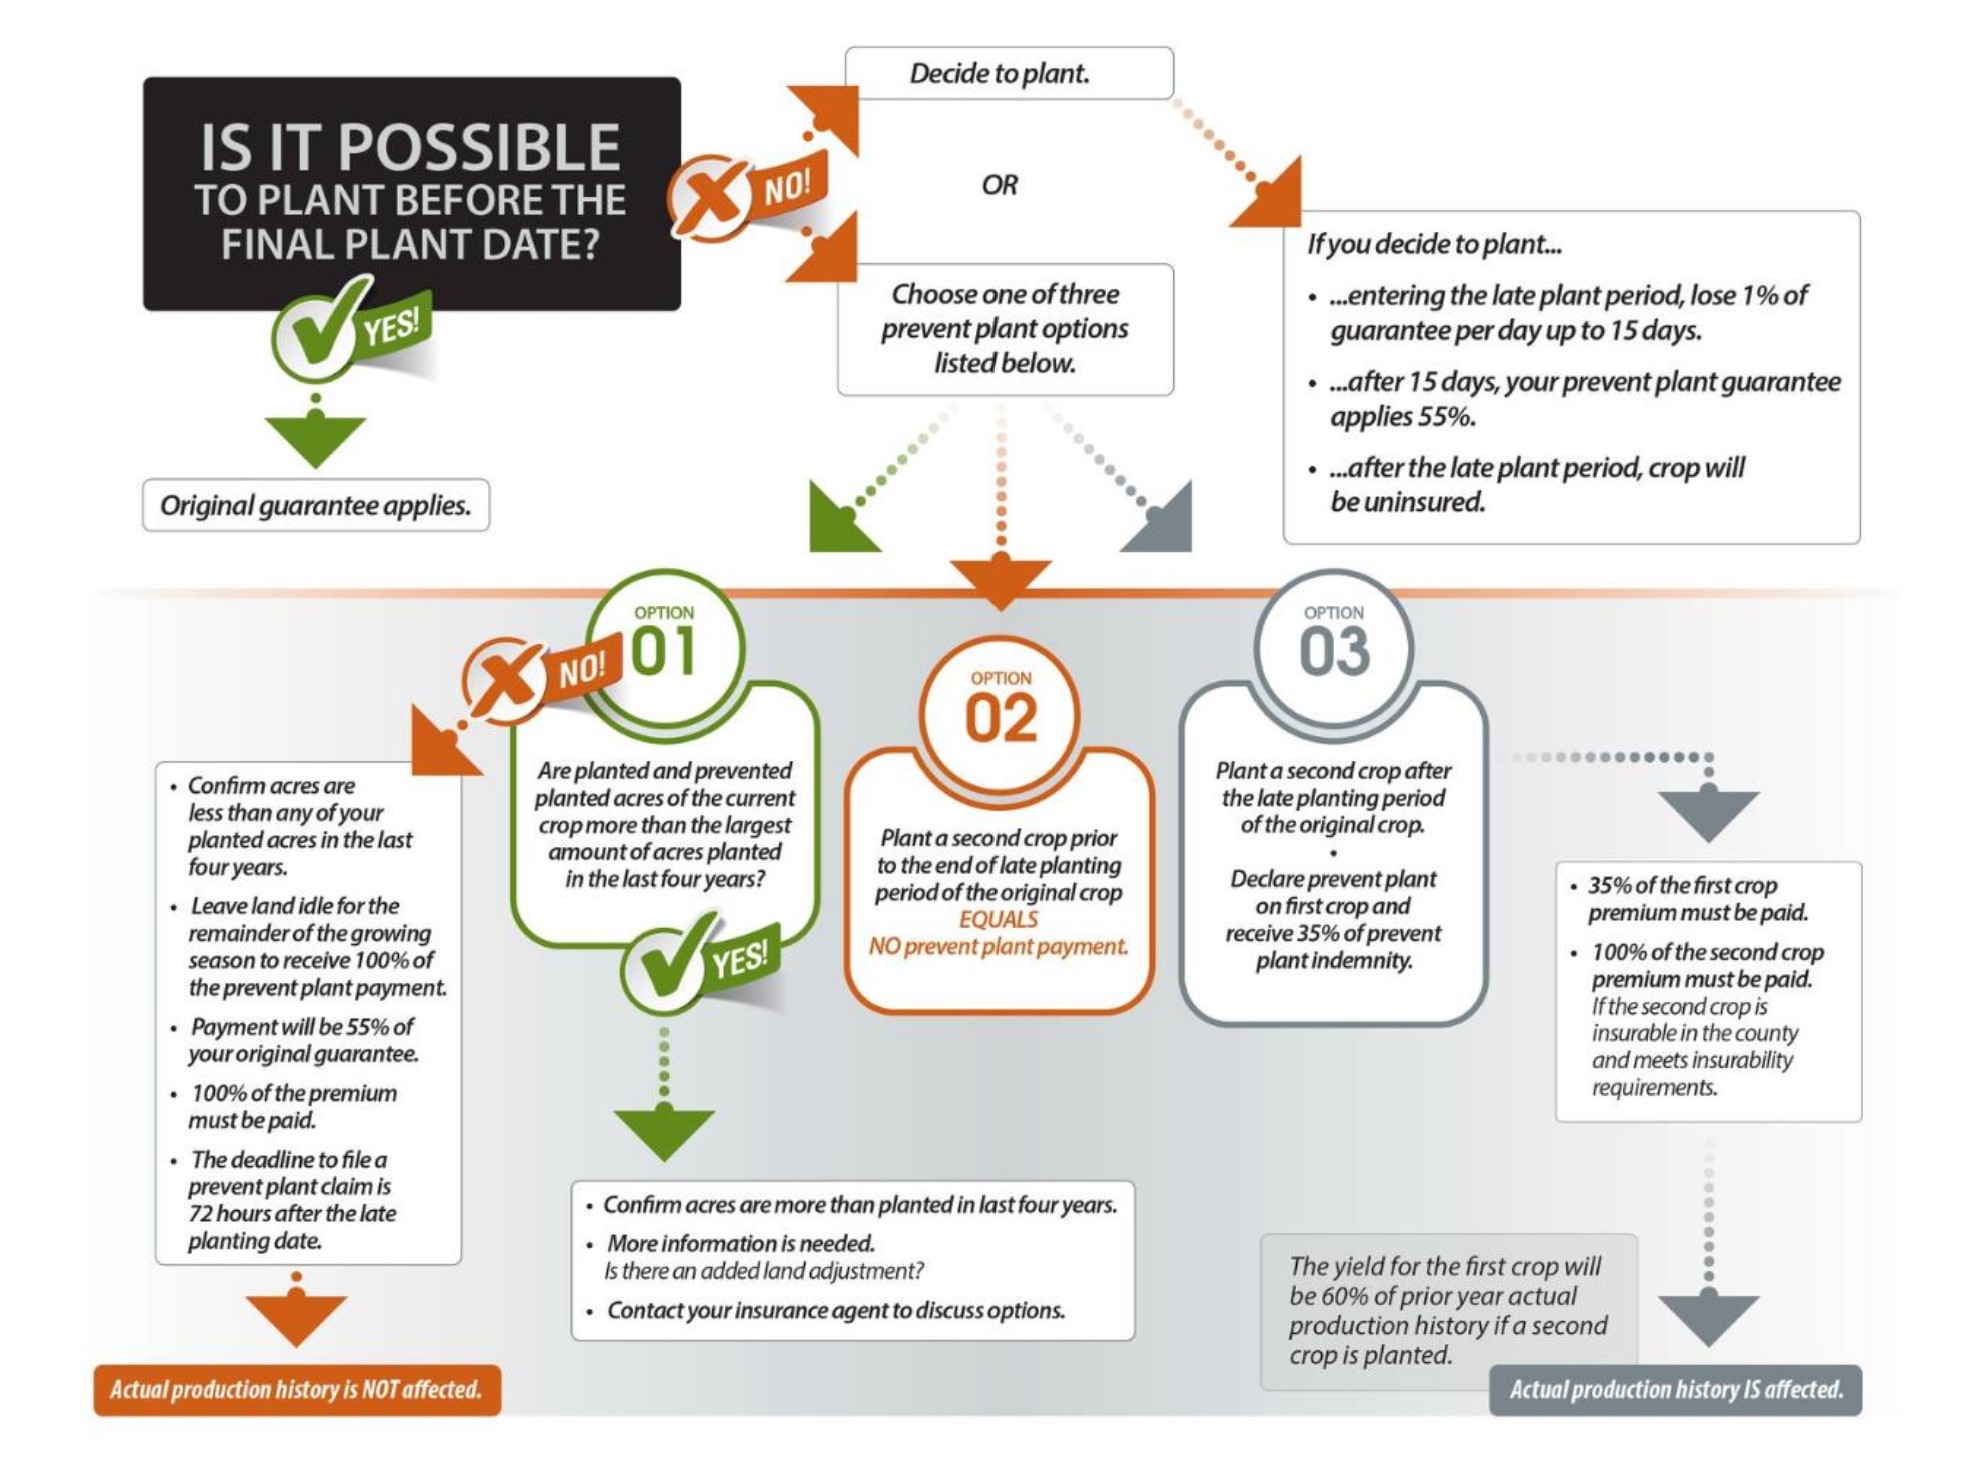 Flow chart that answers the question "Is it possible to plant before the final plant date?" With a series of yes and no questions and different arrows pointing to different options based on the scenario. Download the PDF below for a full description of the content in the flow chart.